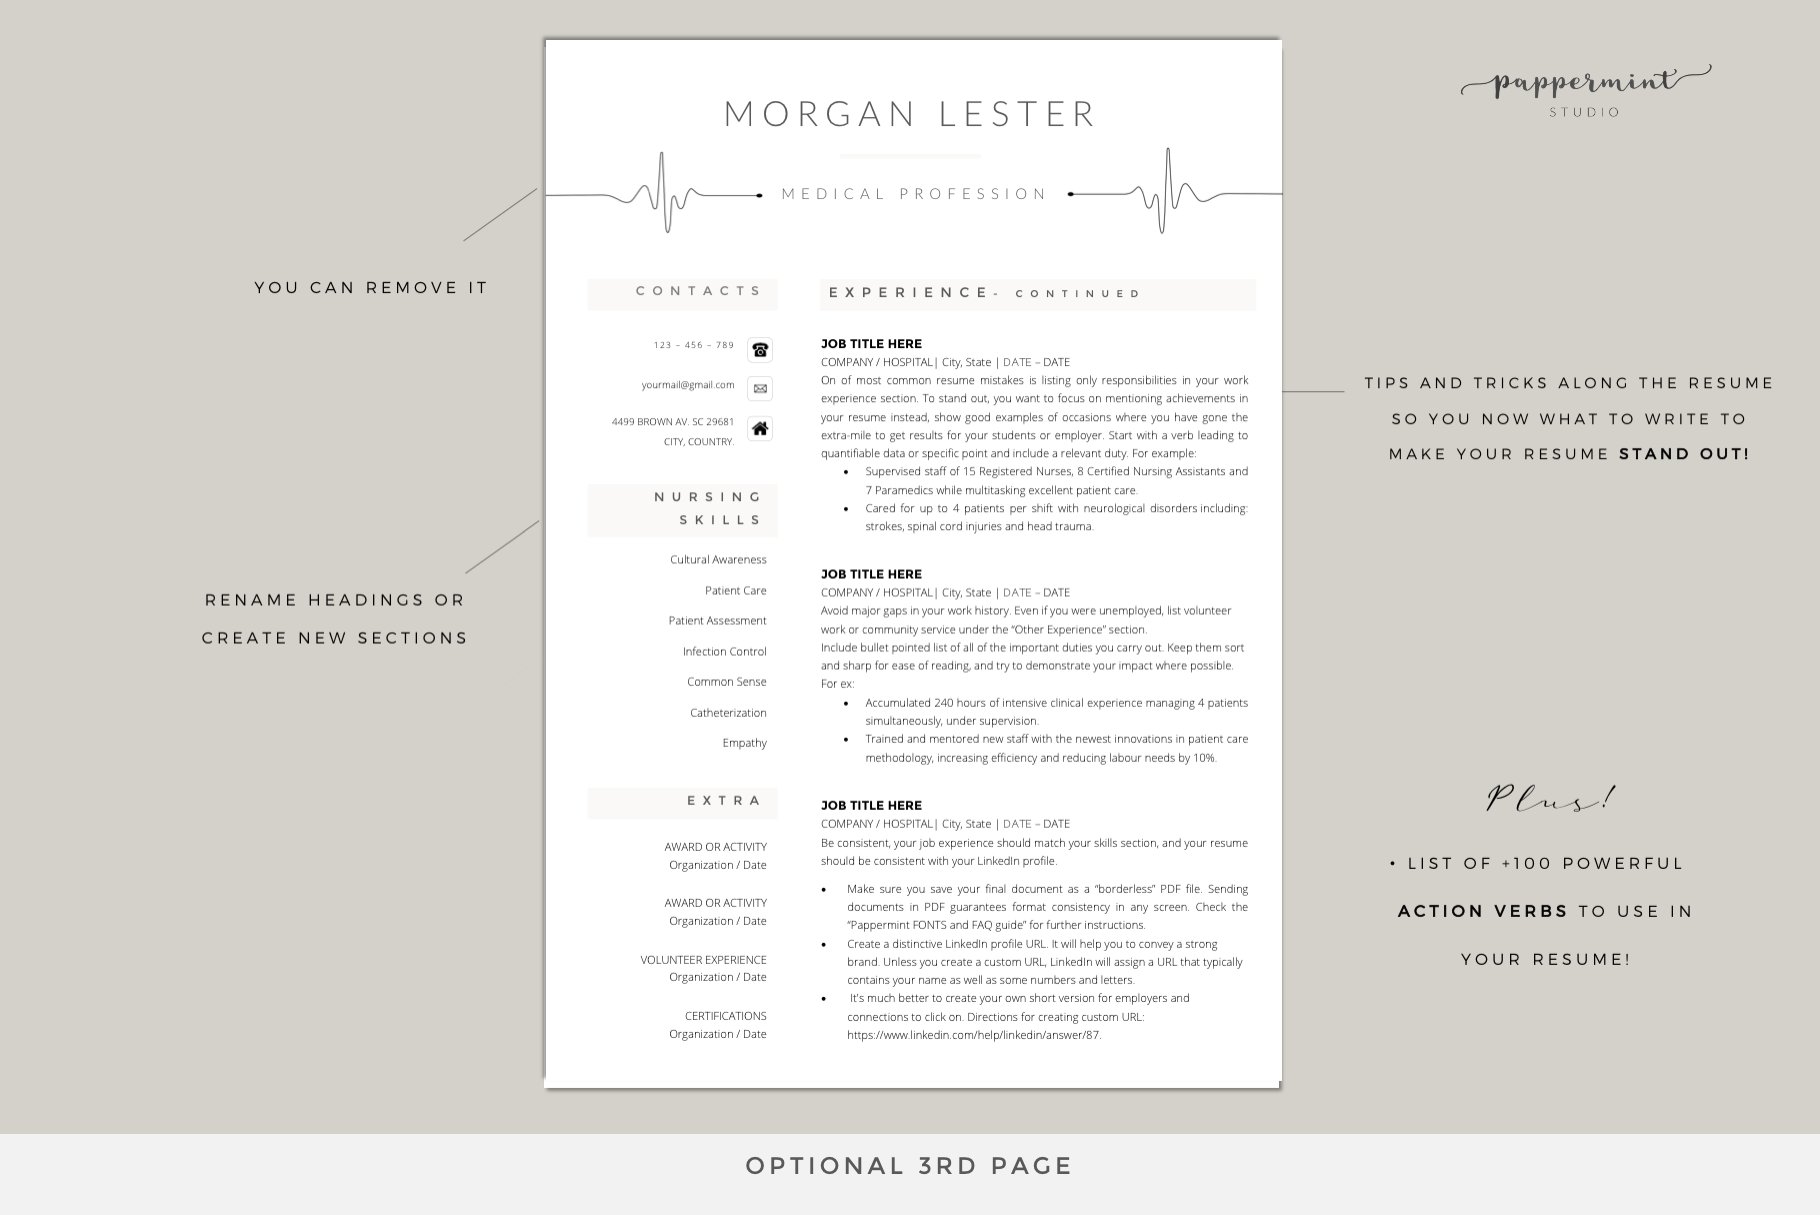 Professional resume template for a medical professional.